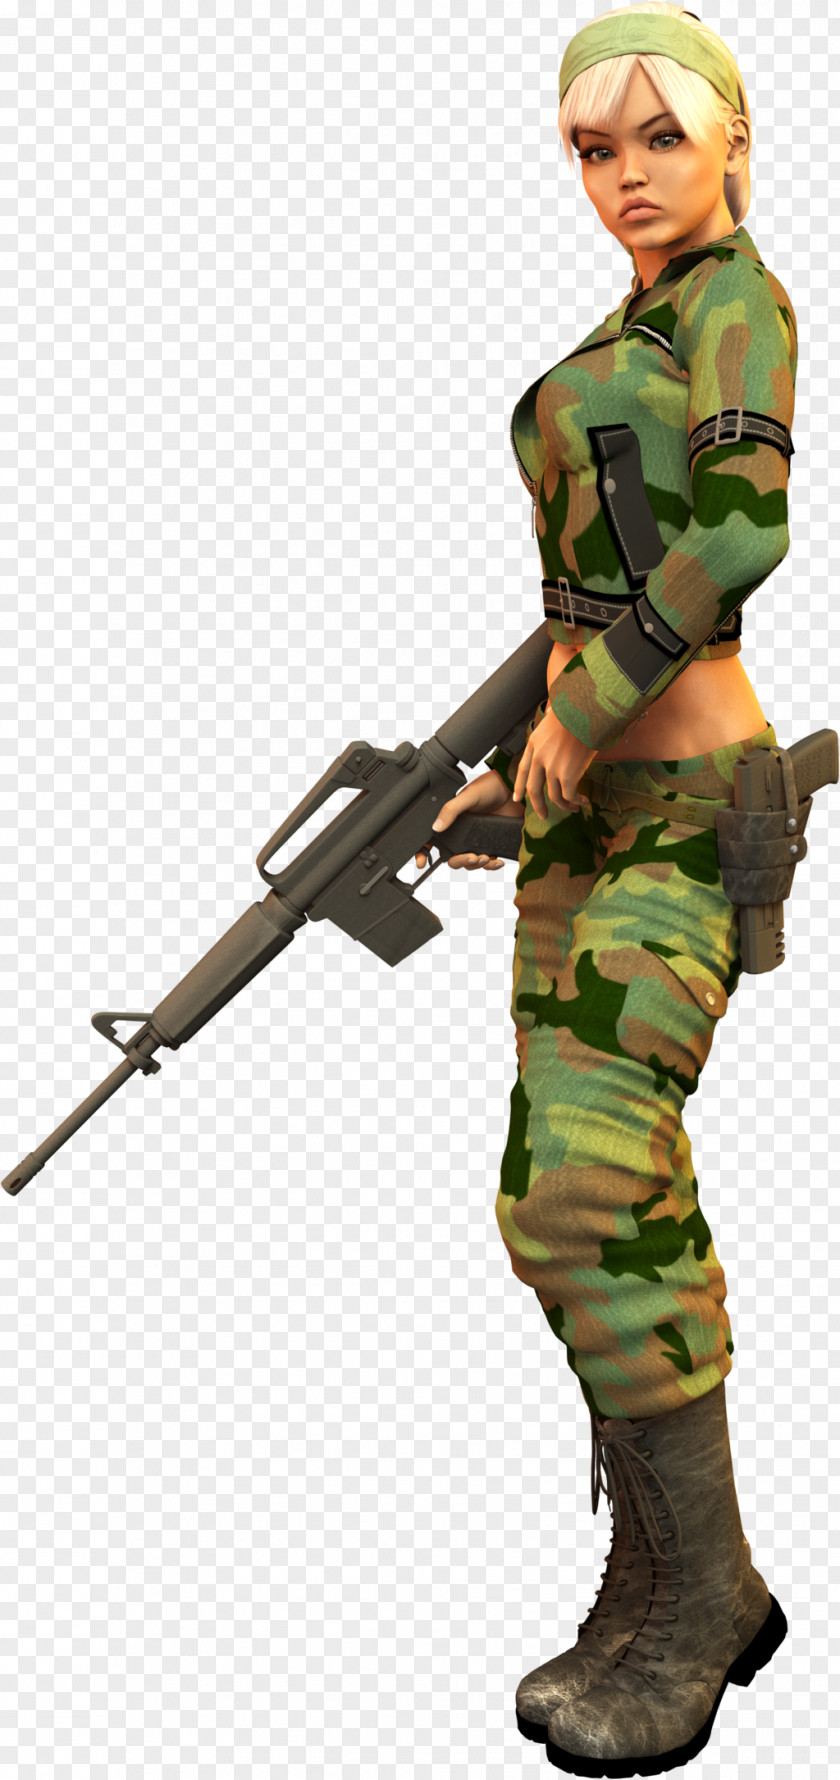 Soldier Infantry Army Military PNG